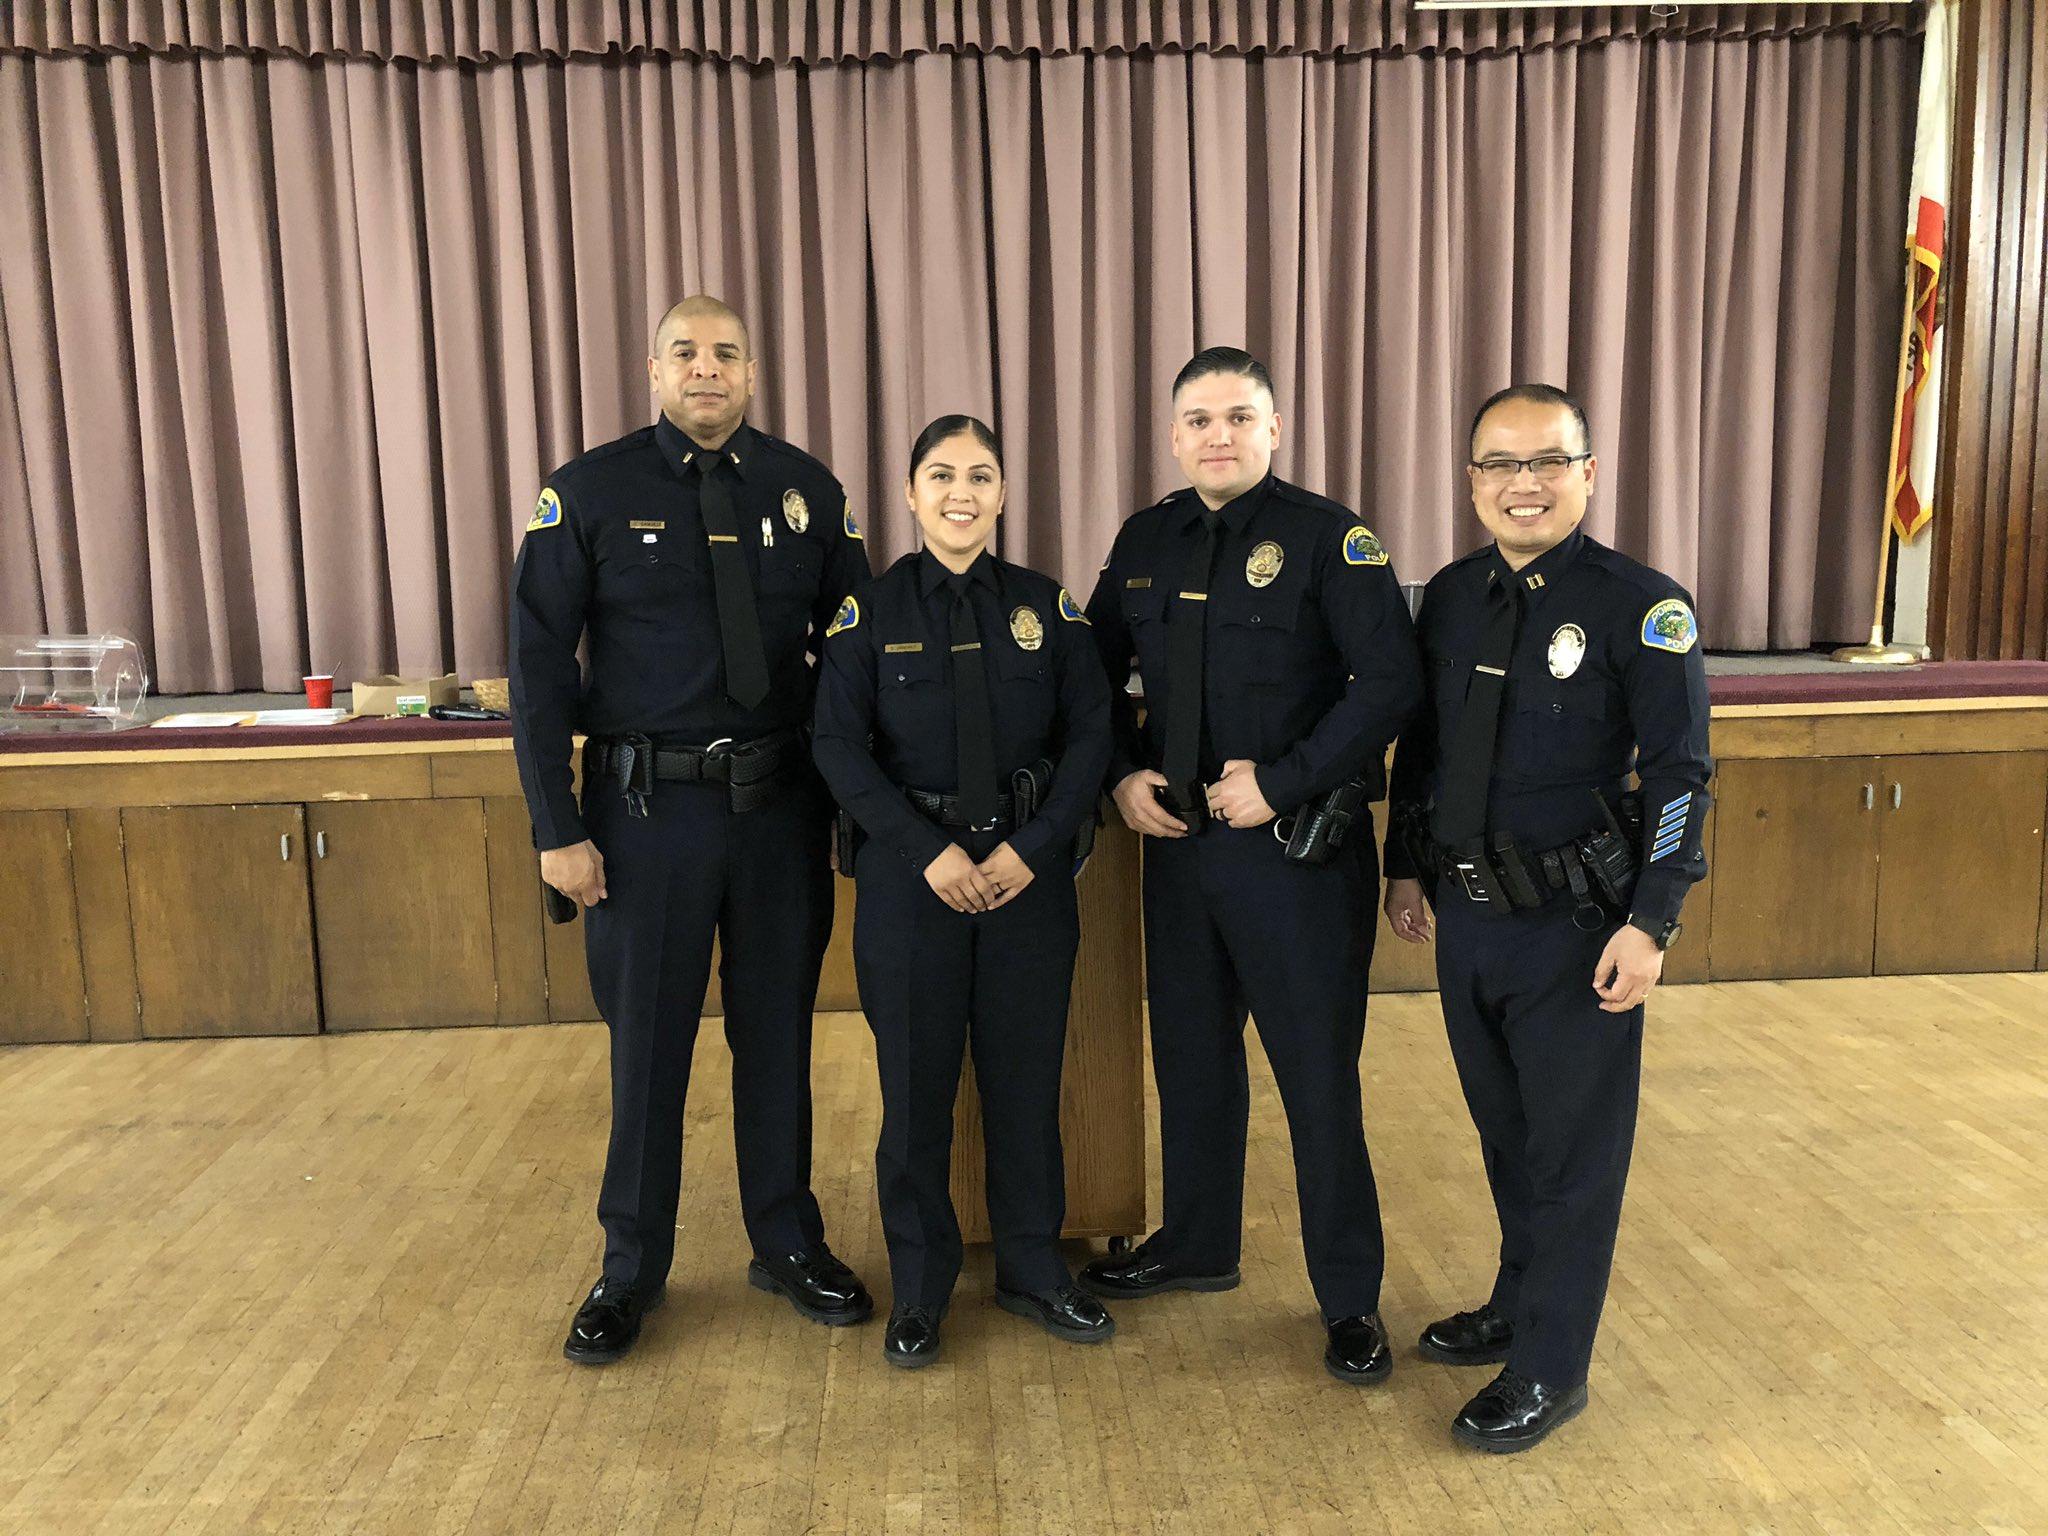 image of officer Jimenez with officers at the ontario elks lodge